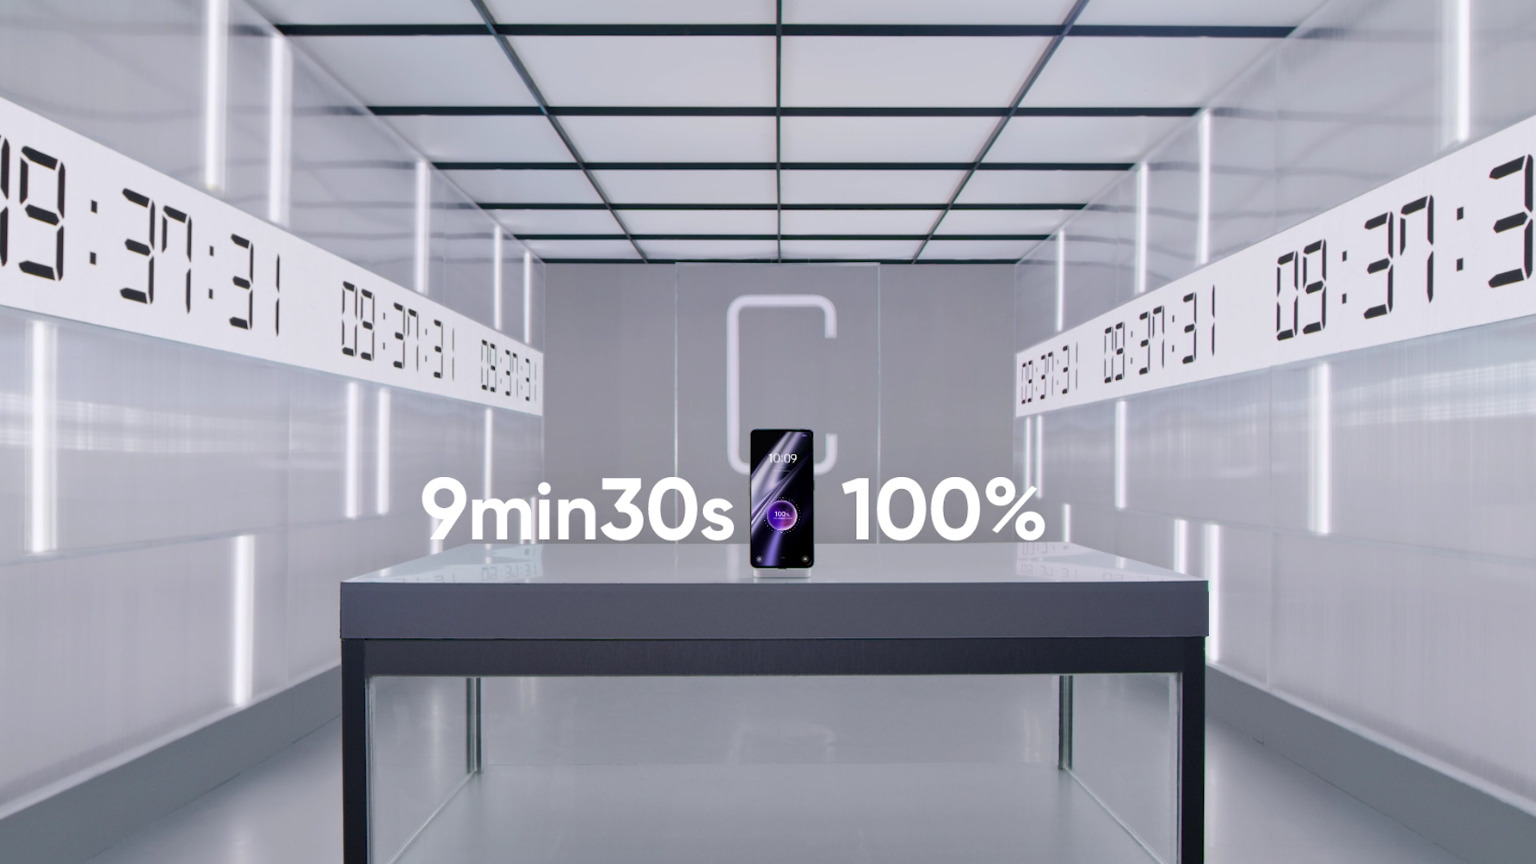 Charge time of the Realme GT3